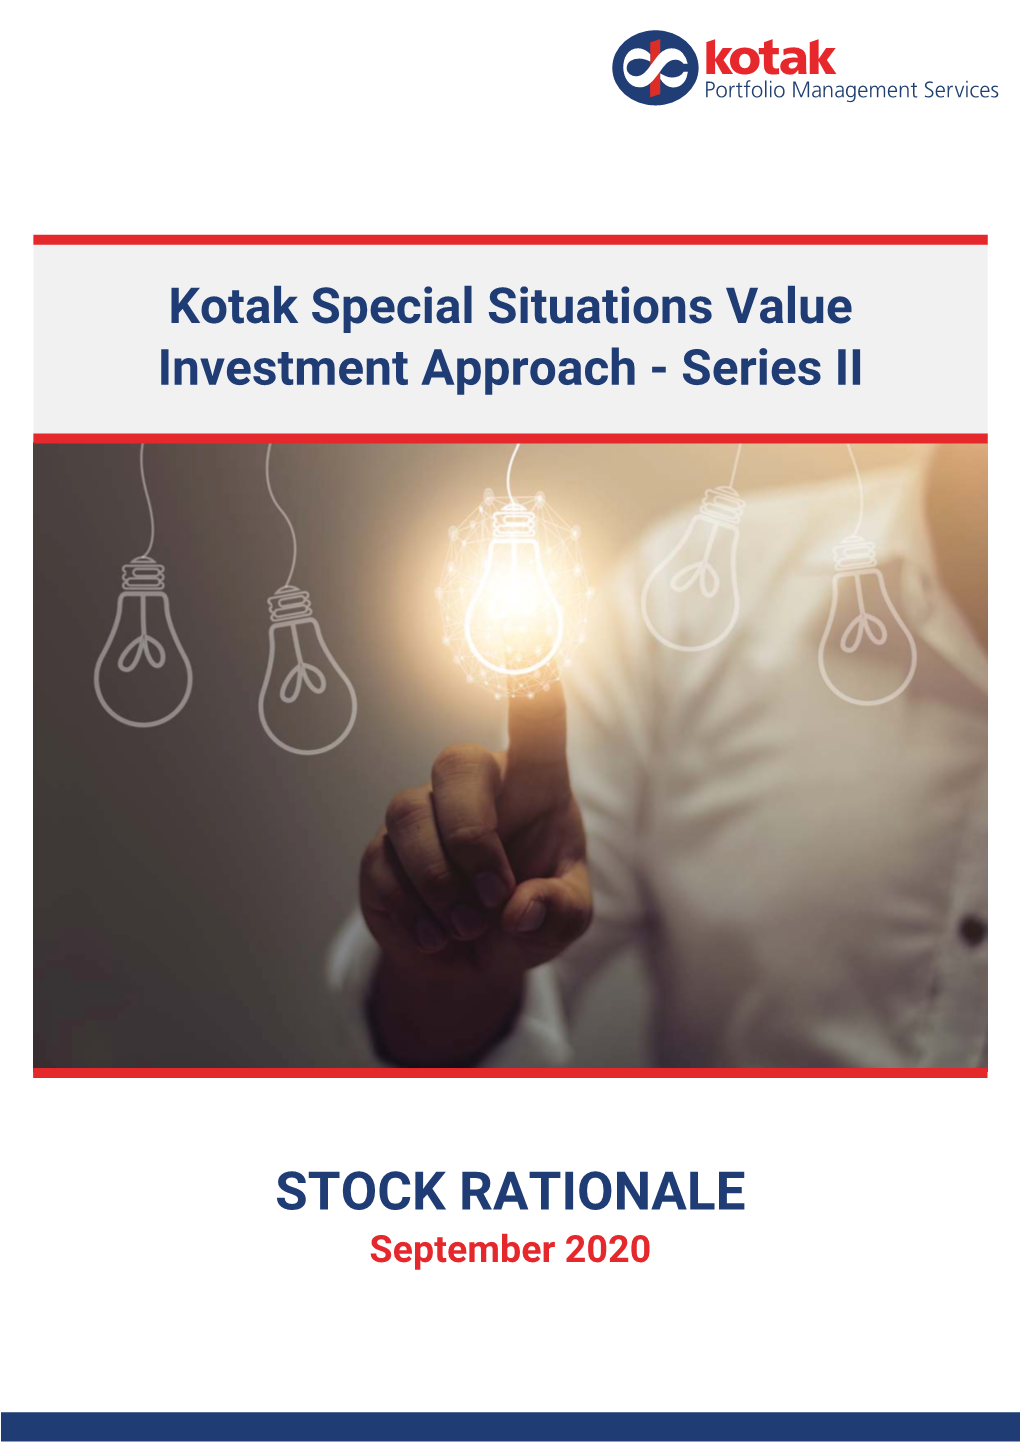 Kotak Special Situations Value Investment Approach - Series II